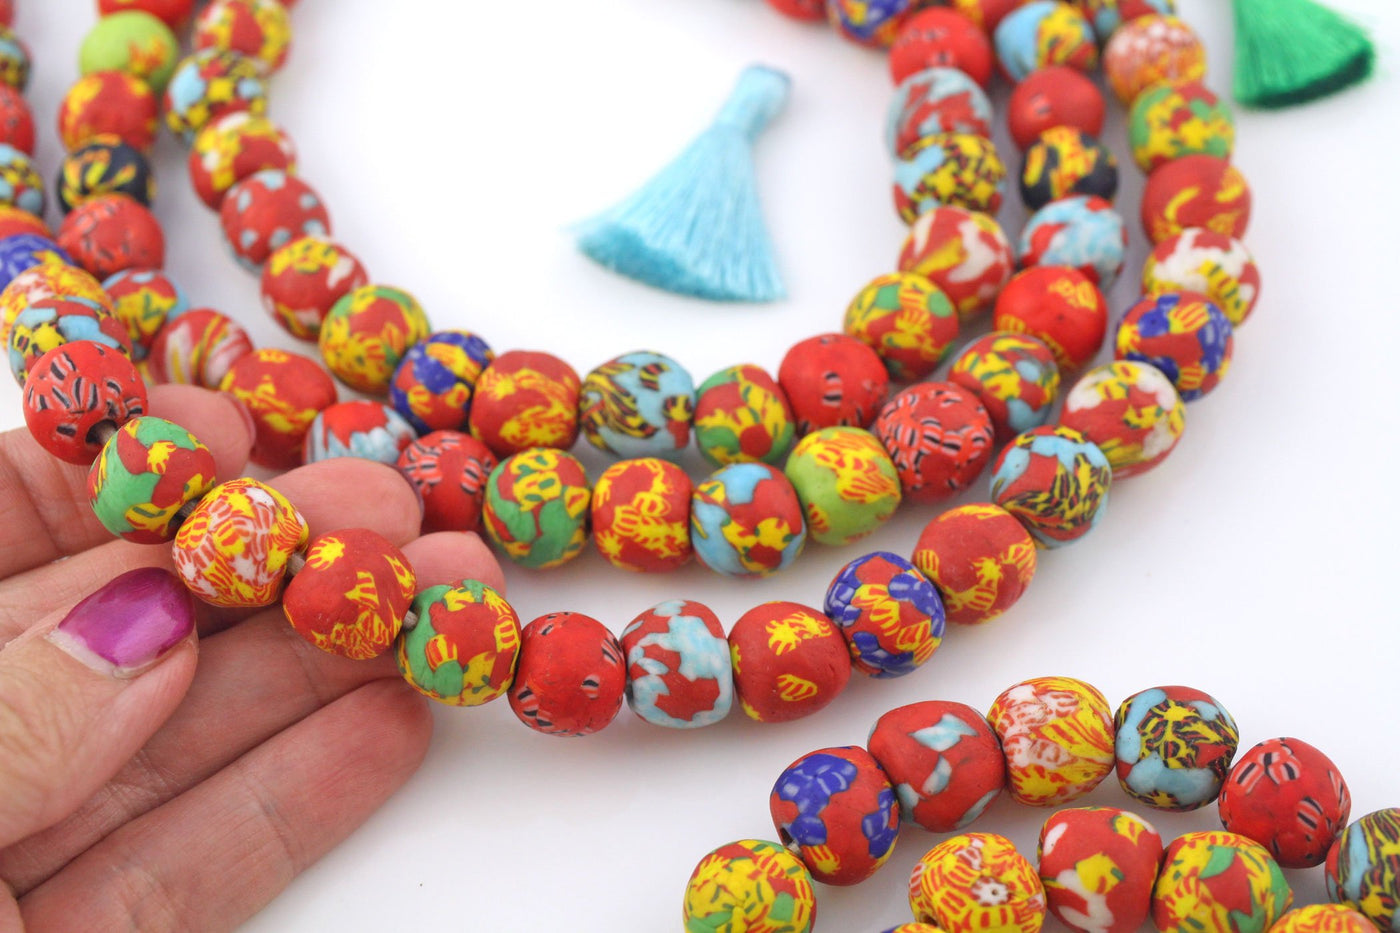 18-20mm Round Multi-Colored Recycled Mosaic Sandcast Ghana Glass Beads